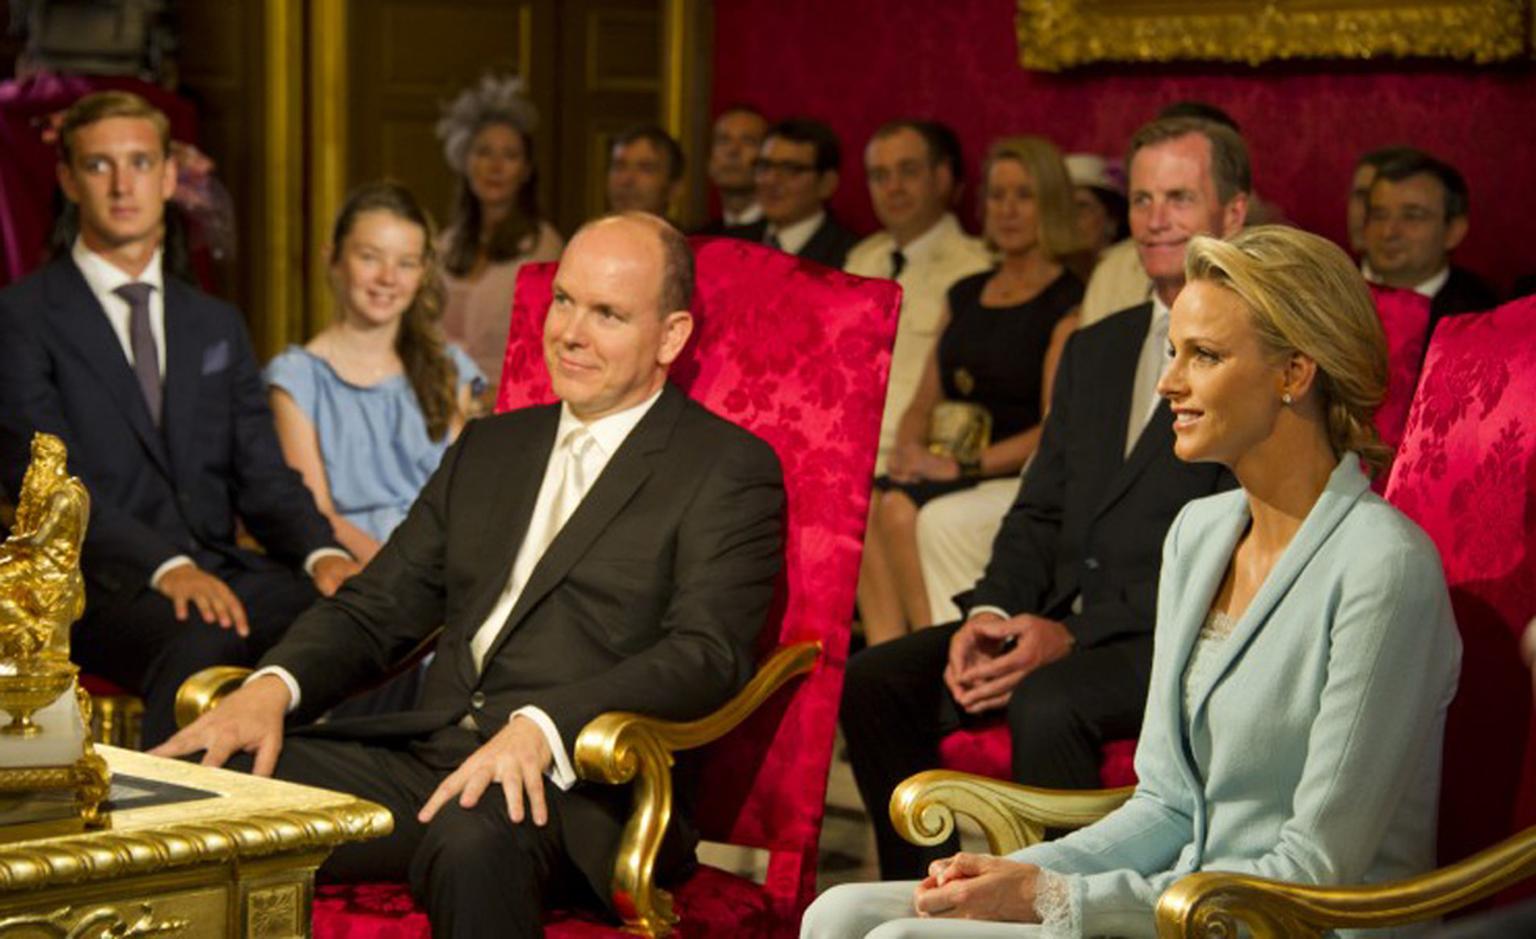 The civil wedding marriage between His Serene Highness Prince Albert II and the now Her Serene Highness Princess Charlene. Photo: Prince's Palace of Monaco